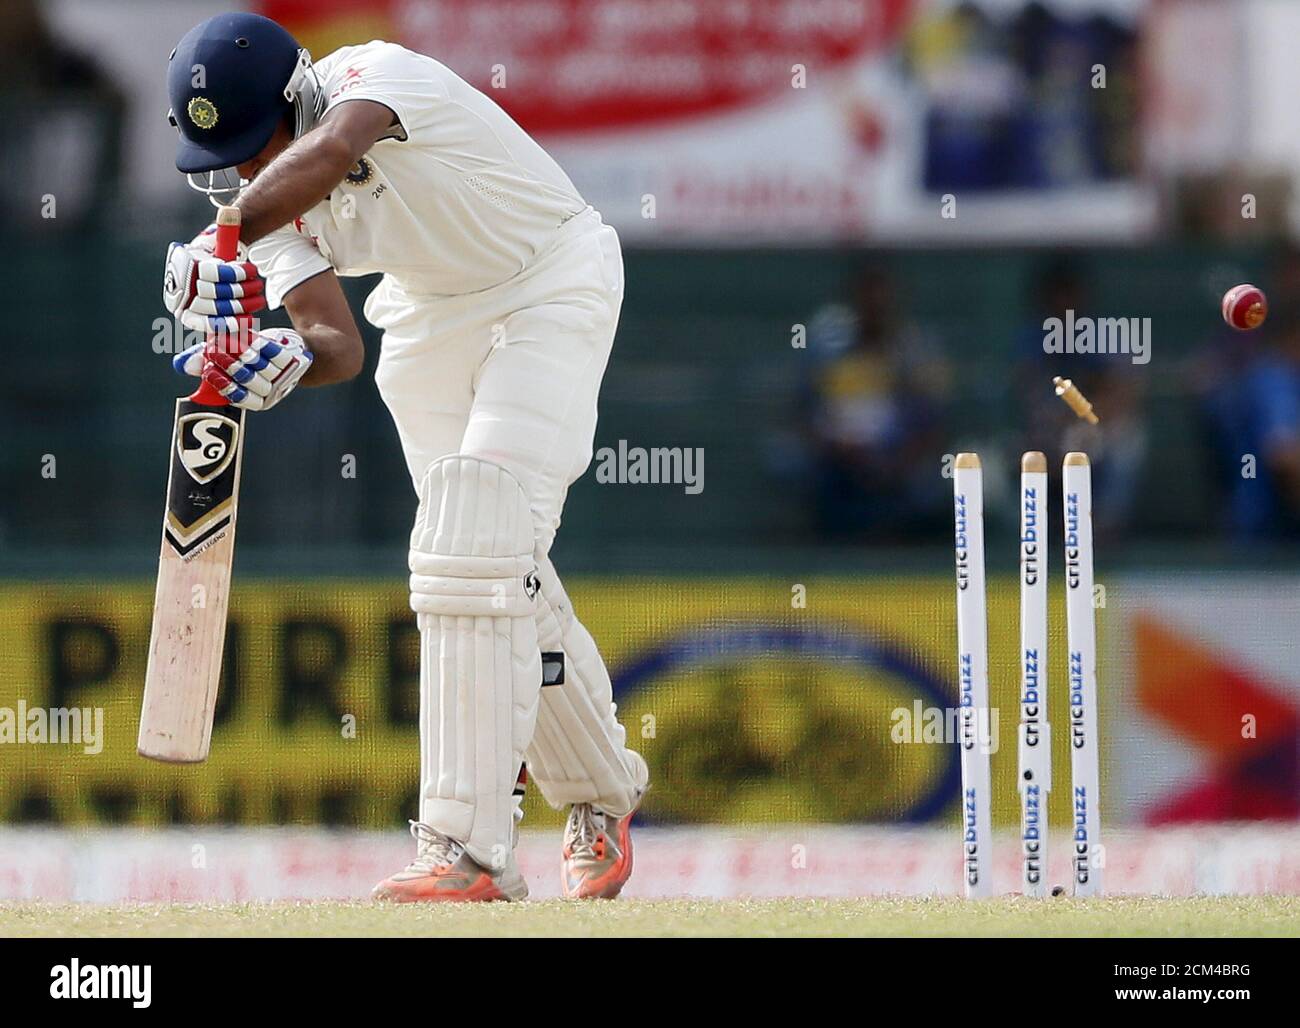 India's Cheteshwar Pujara is bowled out by Sri Lanka's Dhammika Prasad during the third day of their third and final test cricket match in Colombo August 30, 2015. REUTERS/Dinuka Liyanawatte Stock Photo